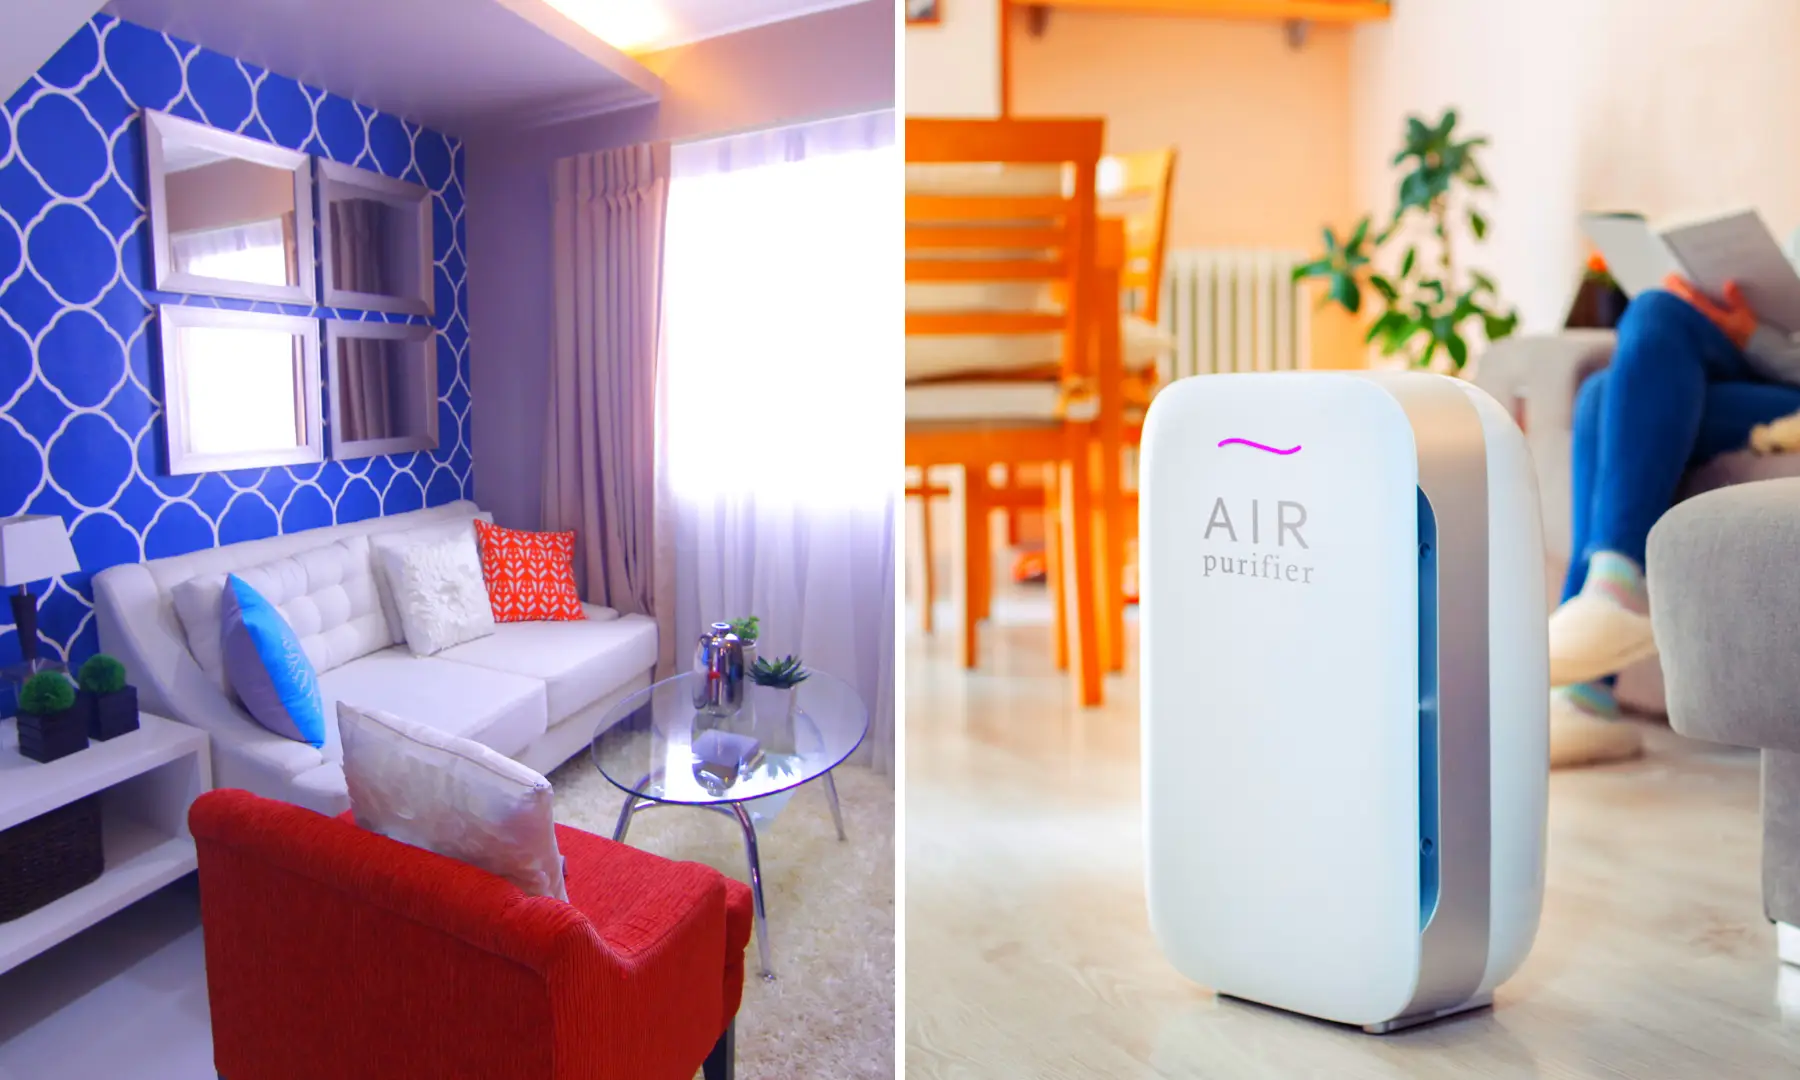 8 Proven Ways to Improve Air Quality at Home